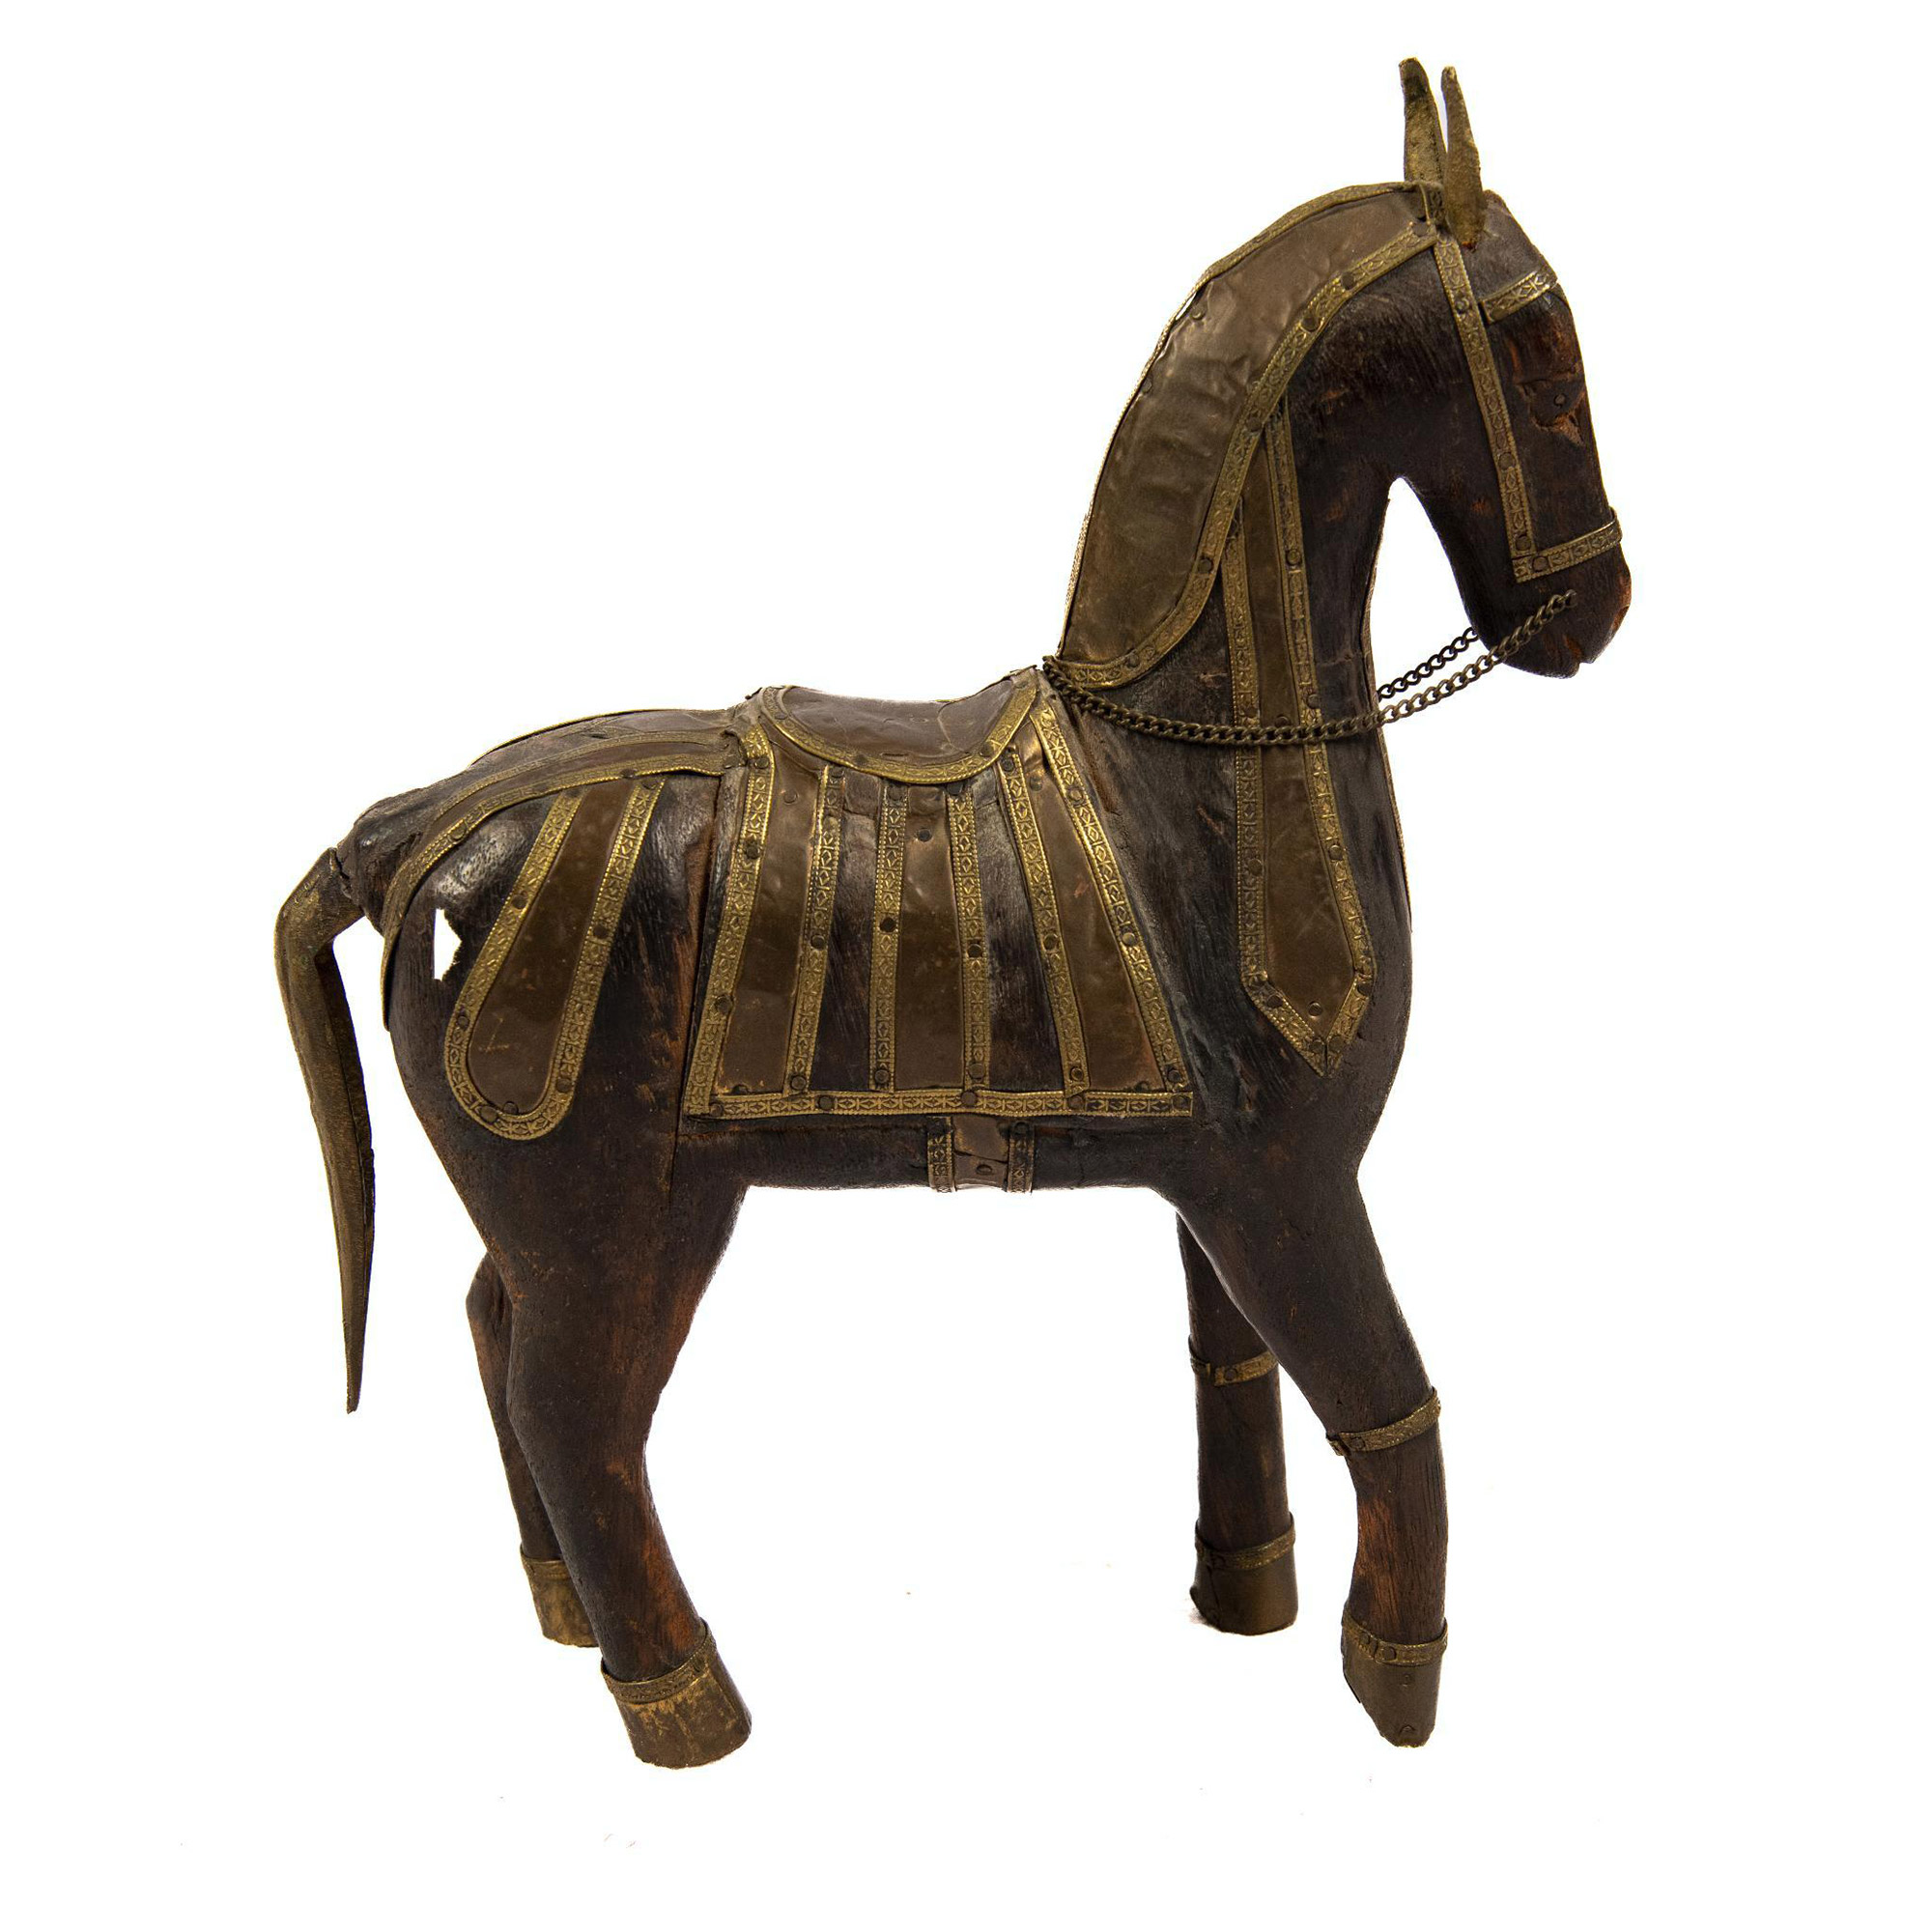 Rajasthani Brass and Wooden War Horse Sculpture - Image 3 of 4